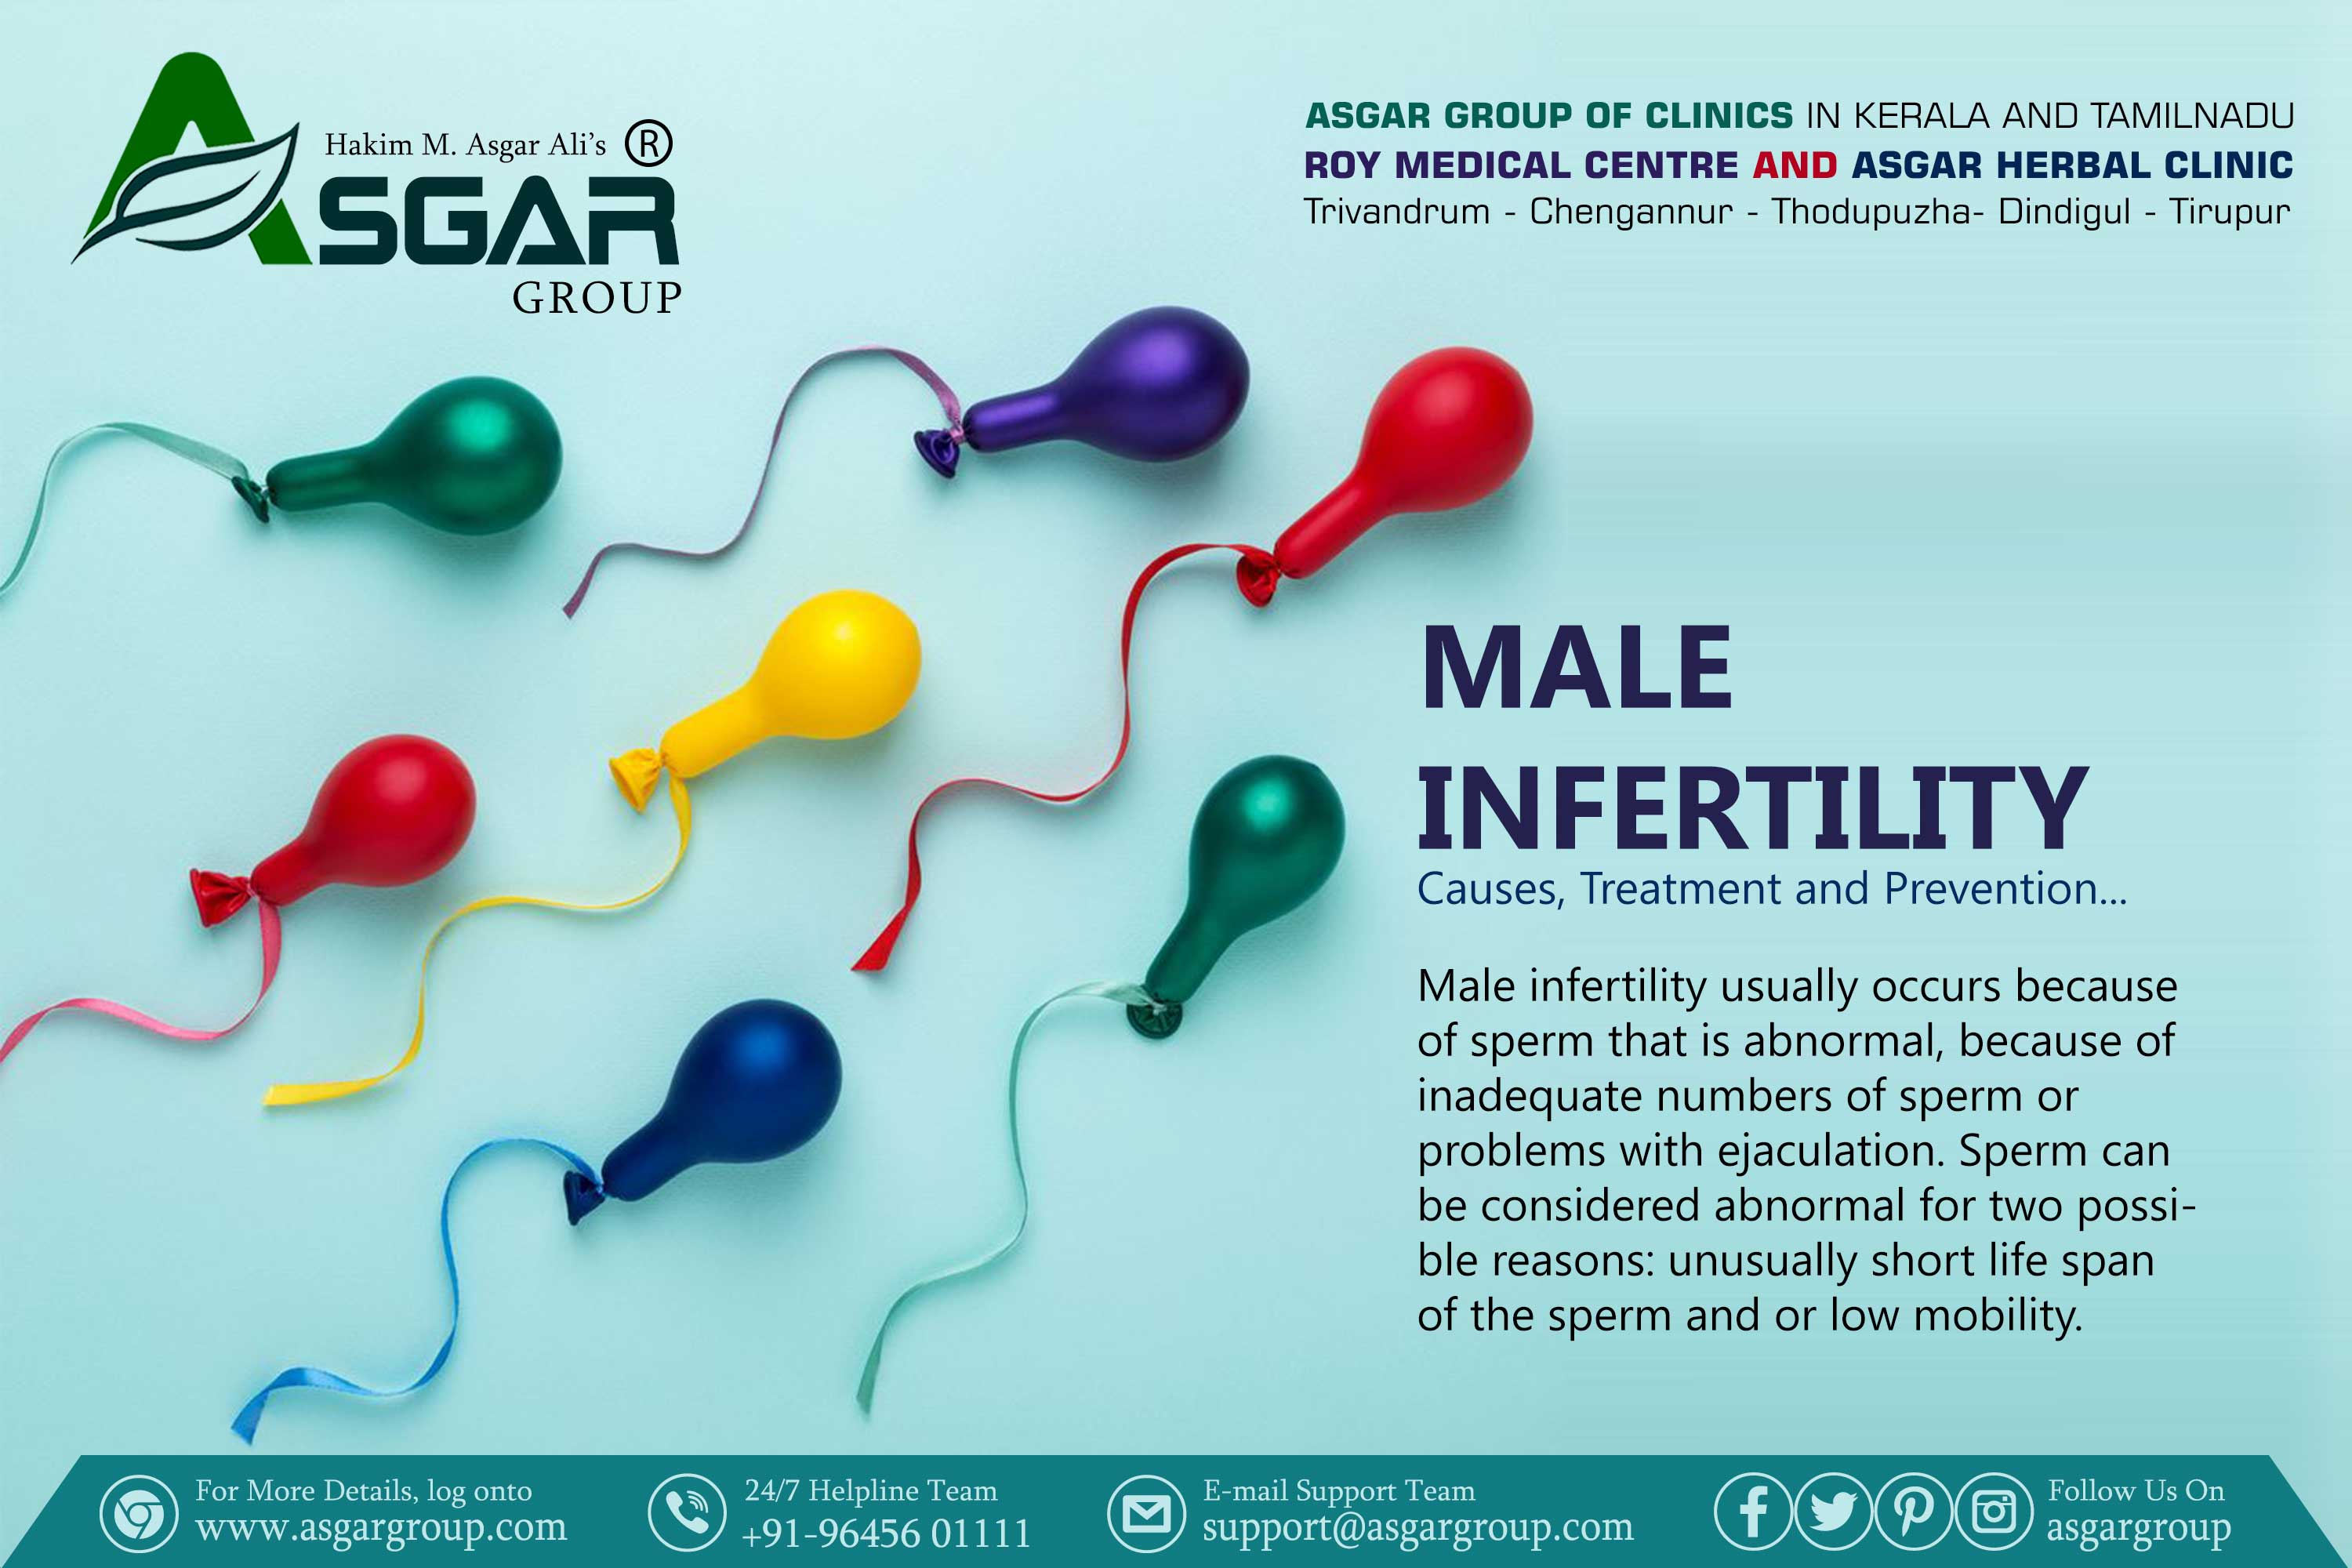 SEXOLOGIST DOCTOR IN KERALA ROY MEDICAL MALE INFERTILITY CENTRE